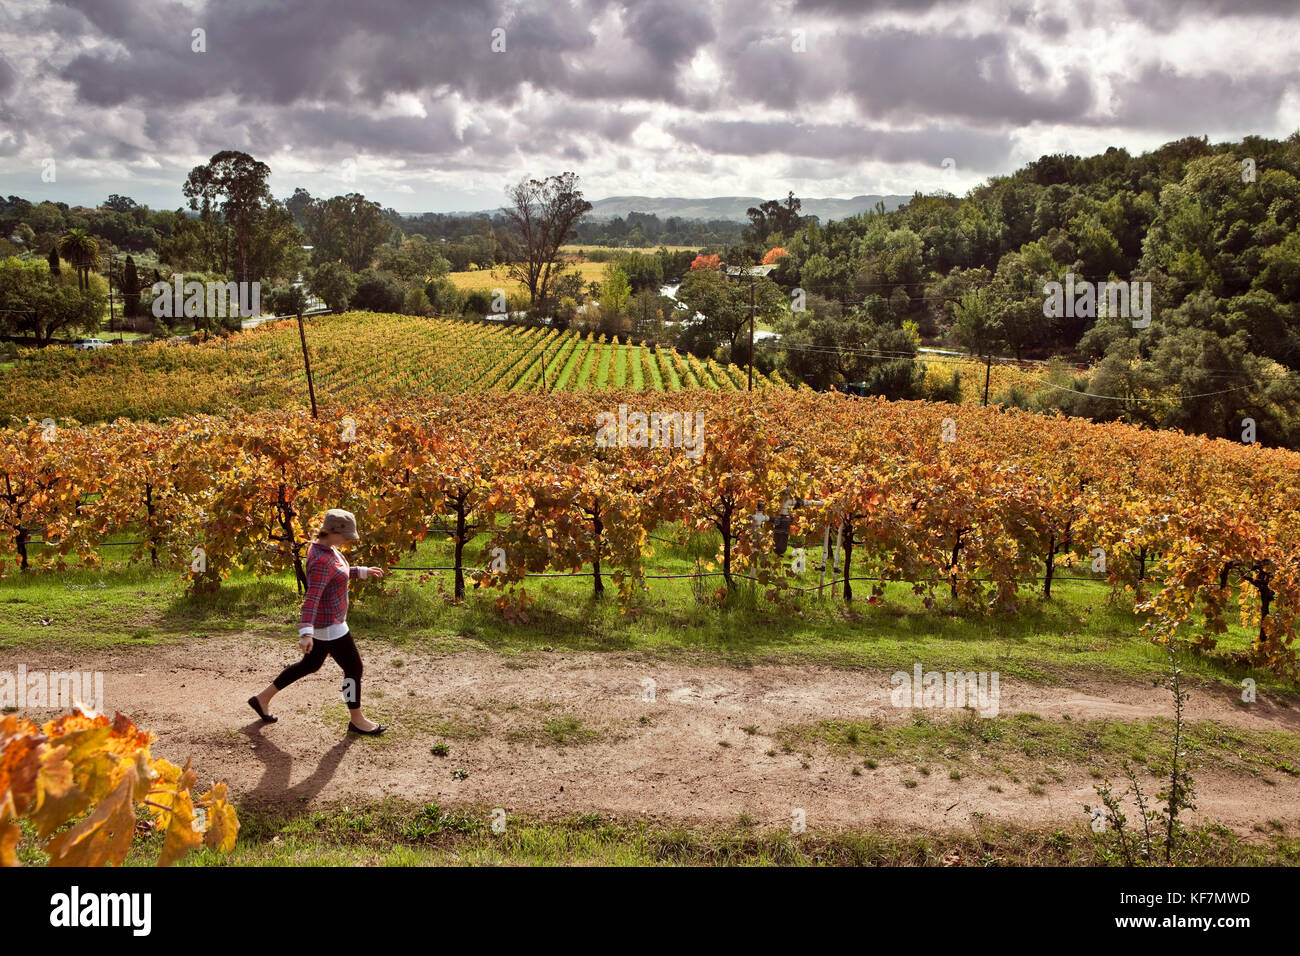 USA, California, Sonoma, Kit Paquin walks through a majestic vineyard landscape in the fall, Ravenswood winery and vineyard Stock Photo